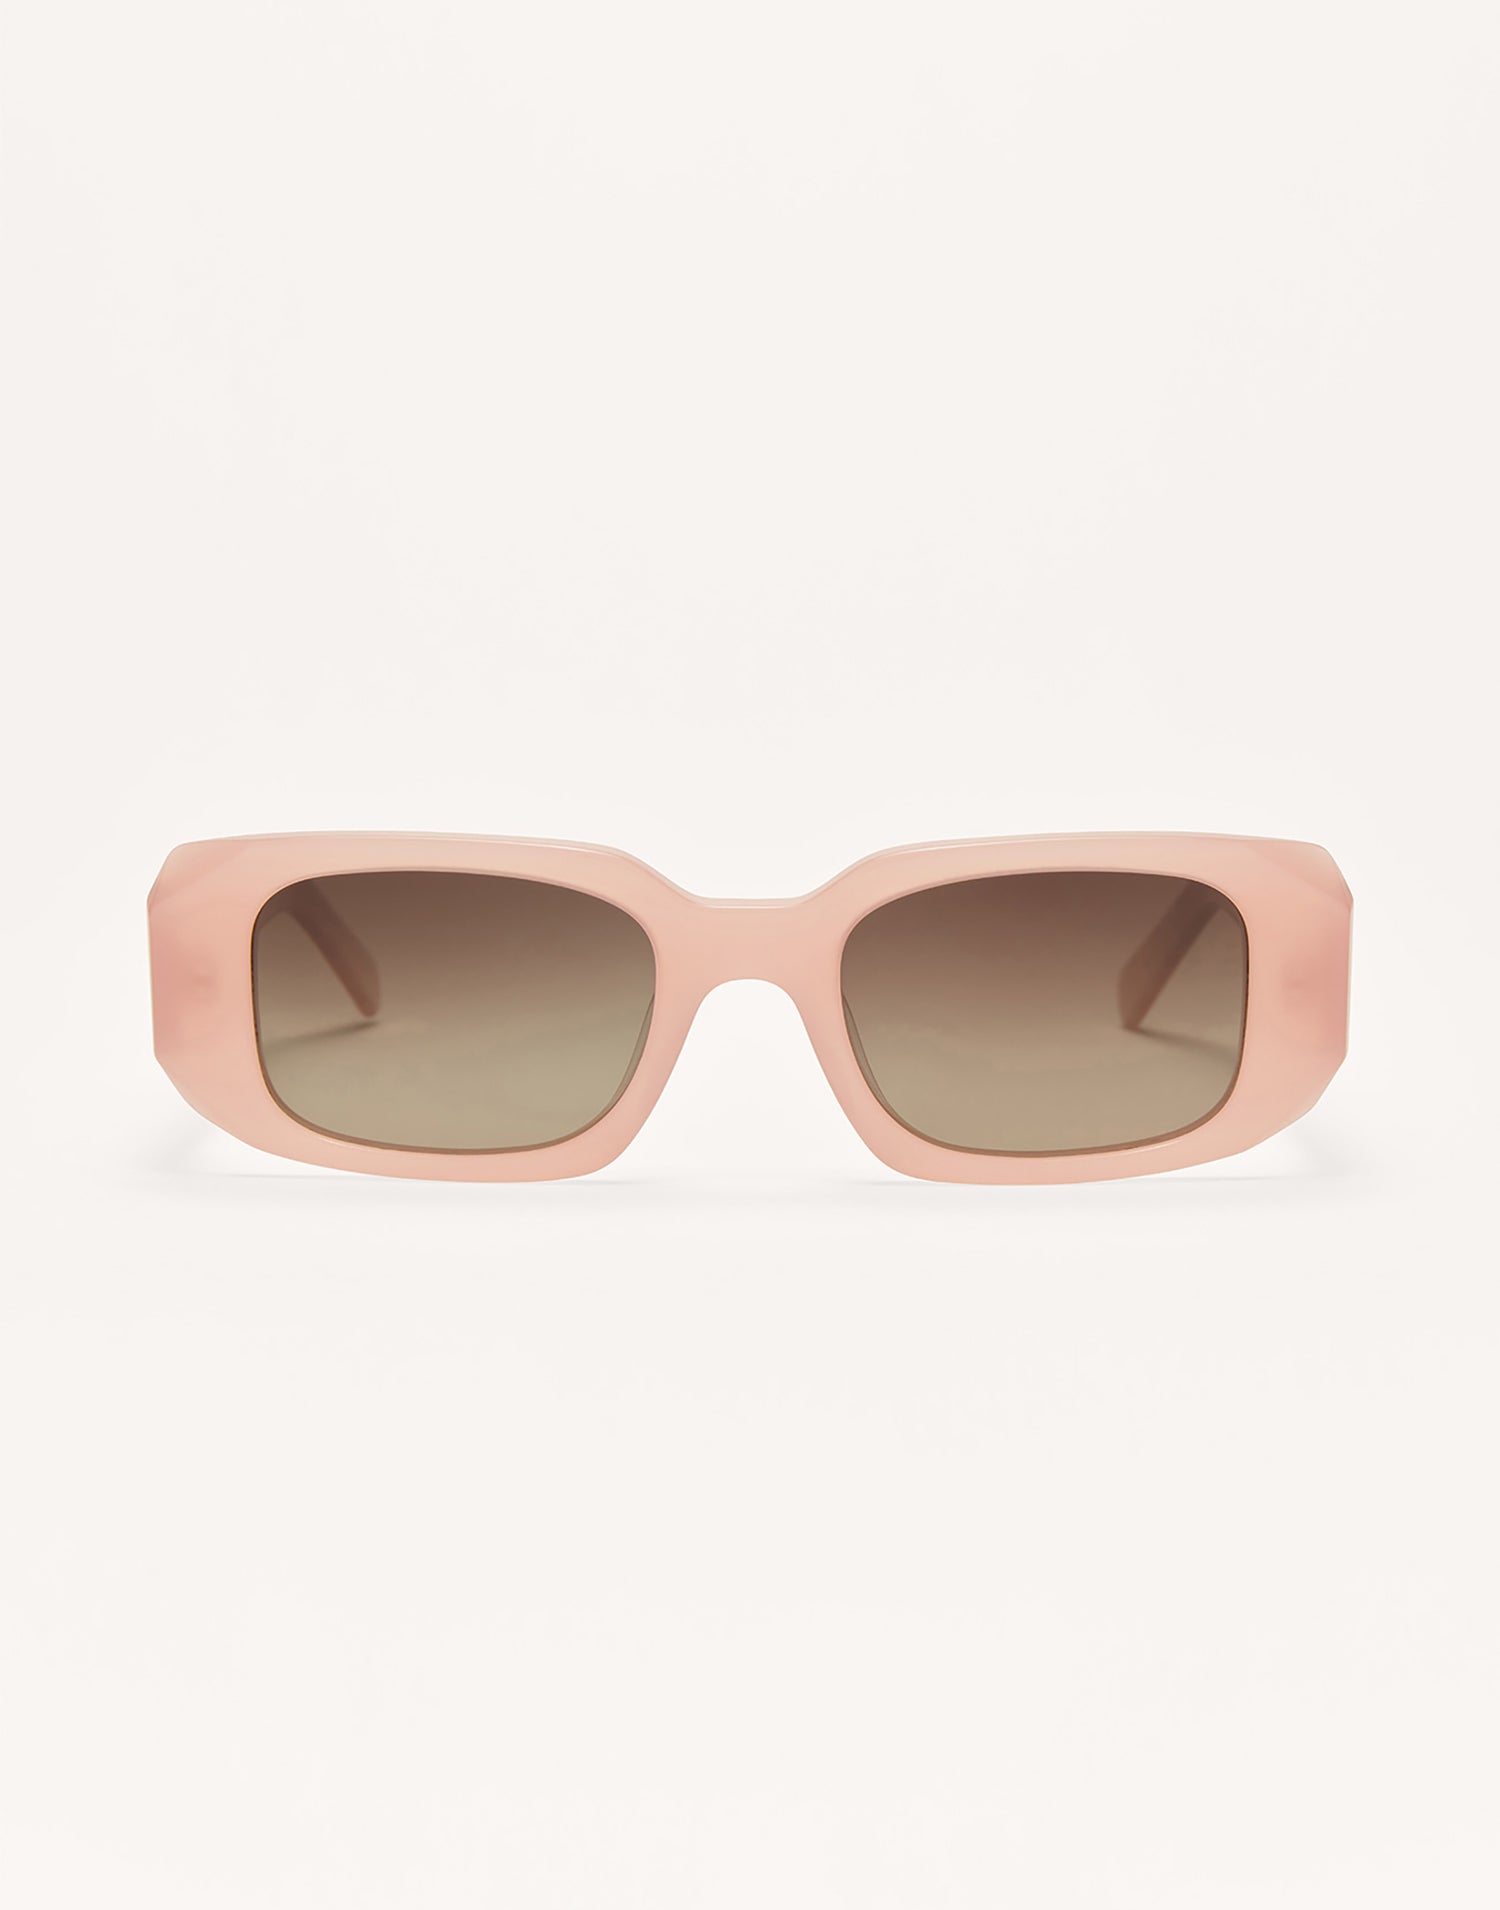 Off Duty Sunglasses by Z Supply in Blush Pink - Front View